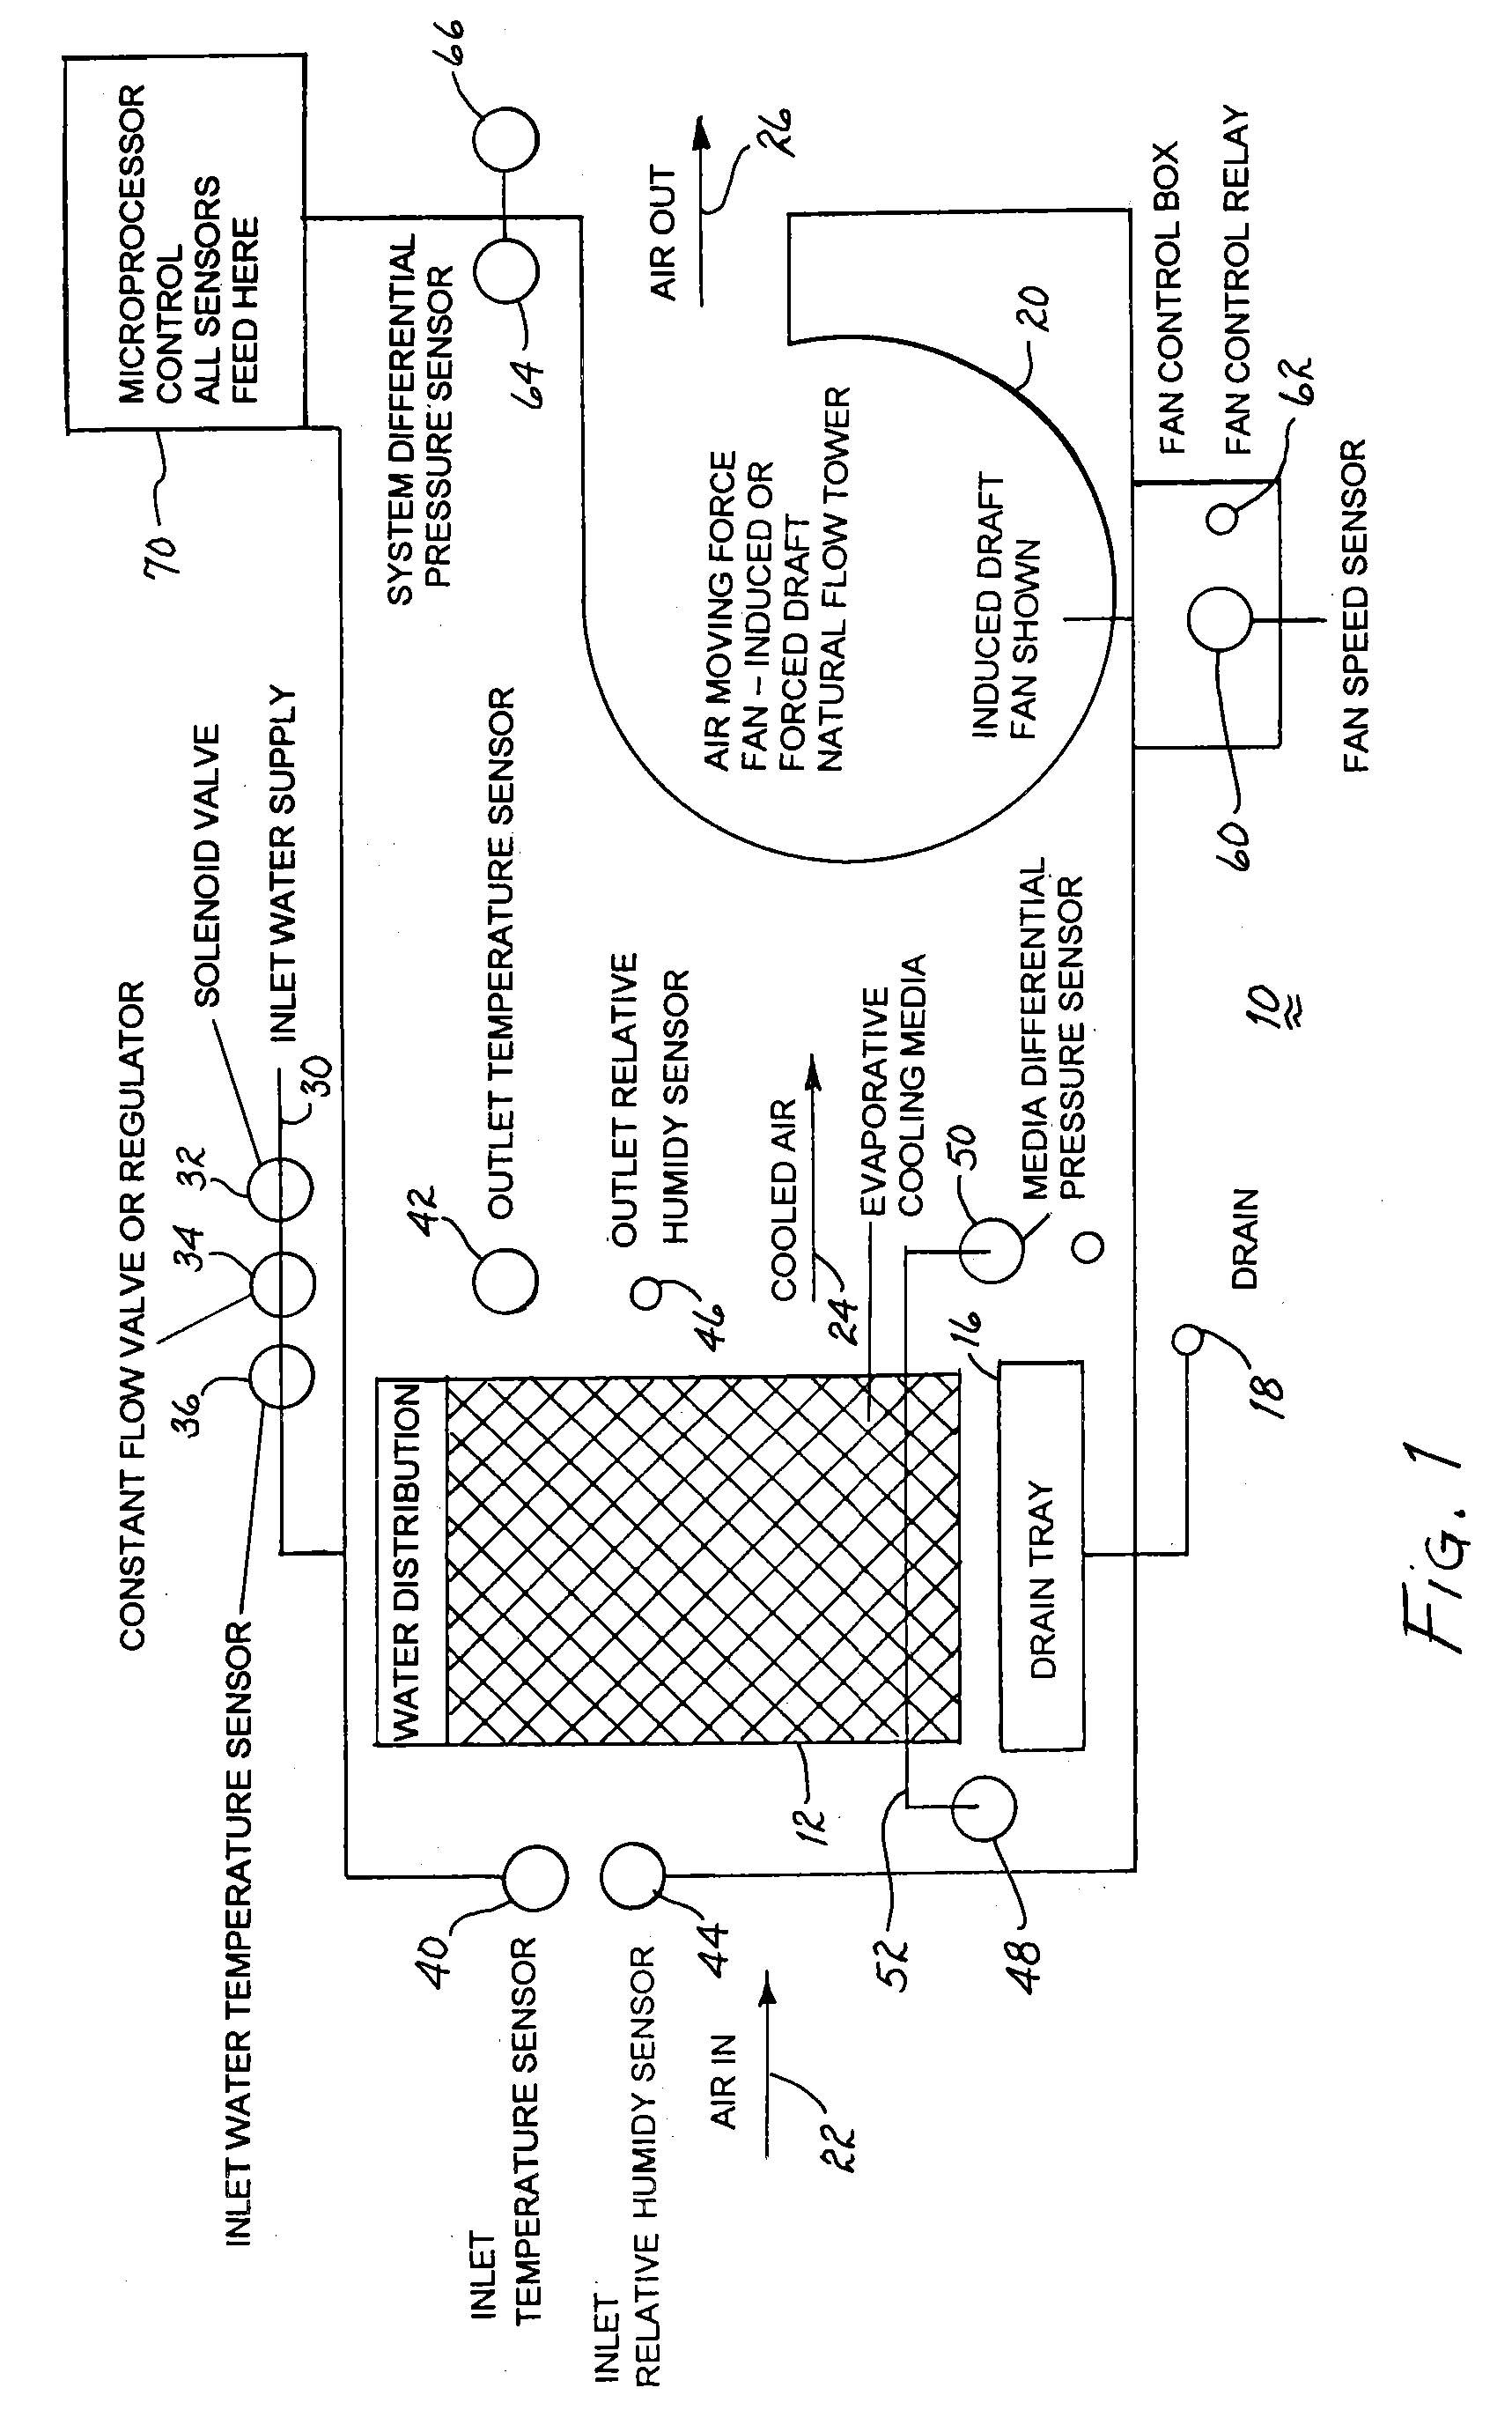 Non Uniform Water Distribution System for an Evaporative Cooler